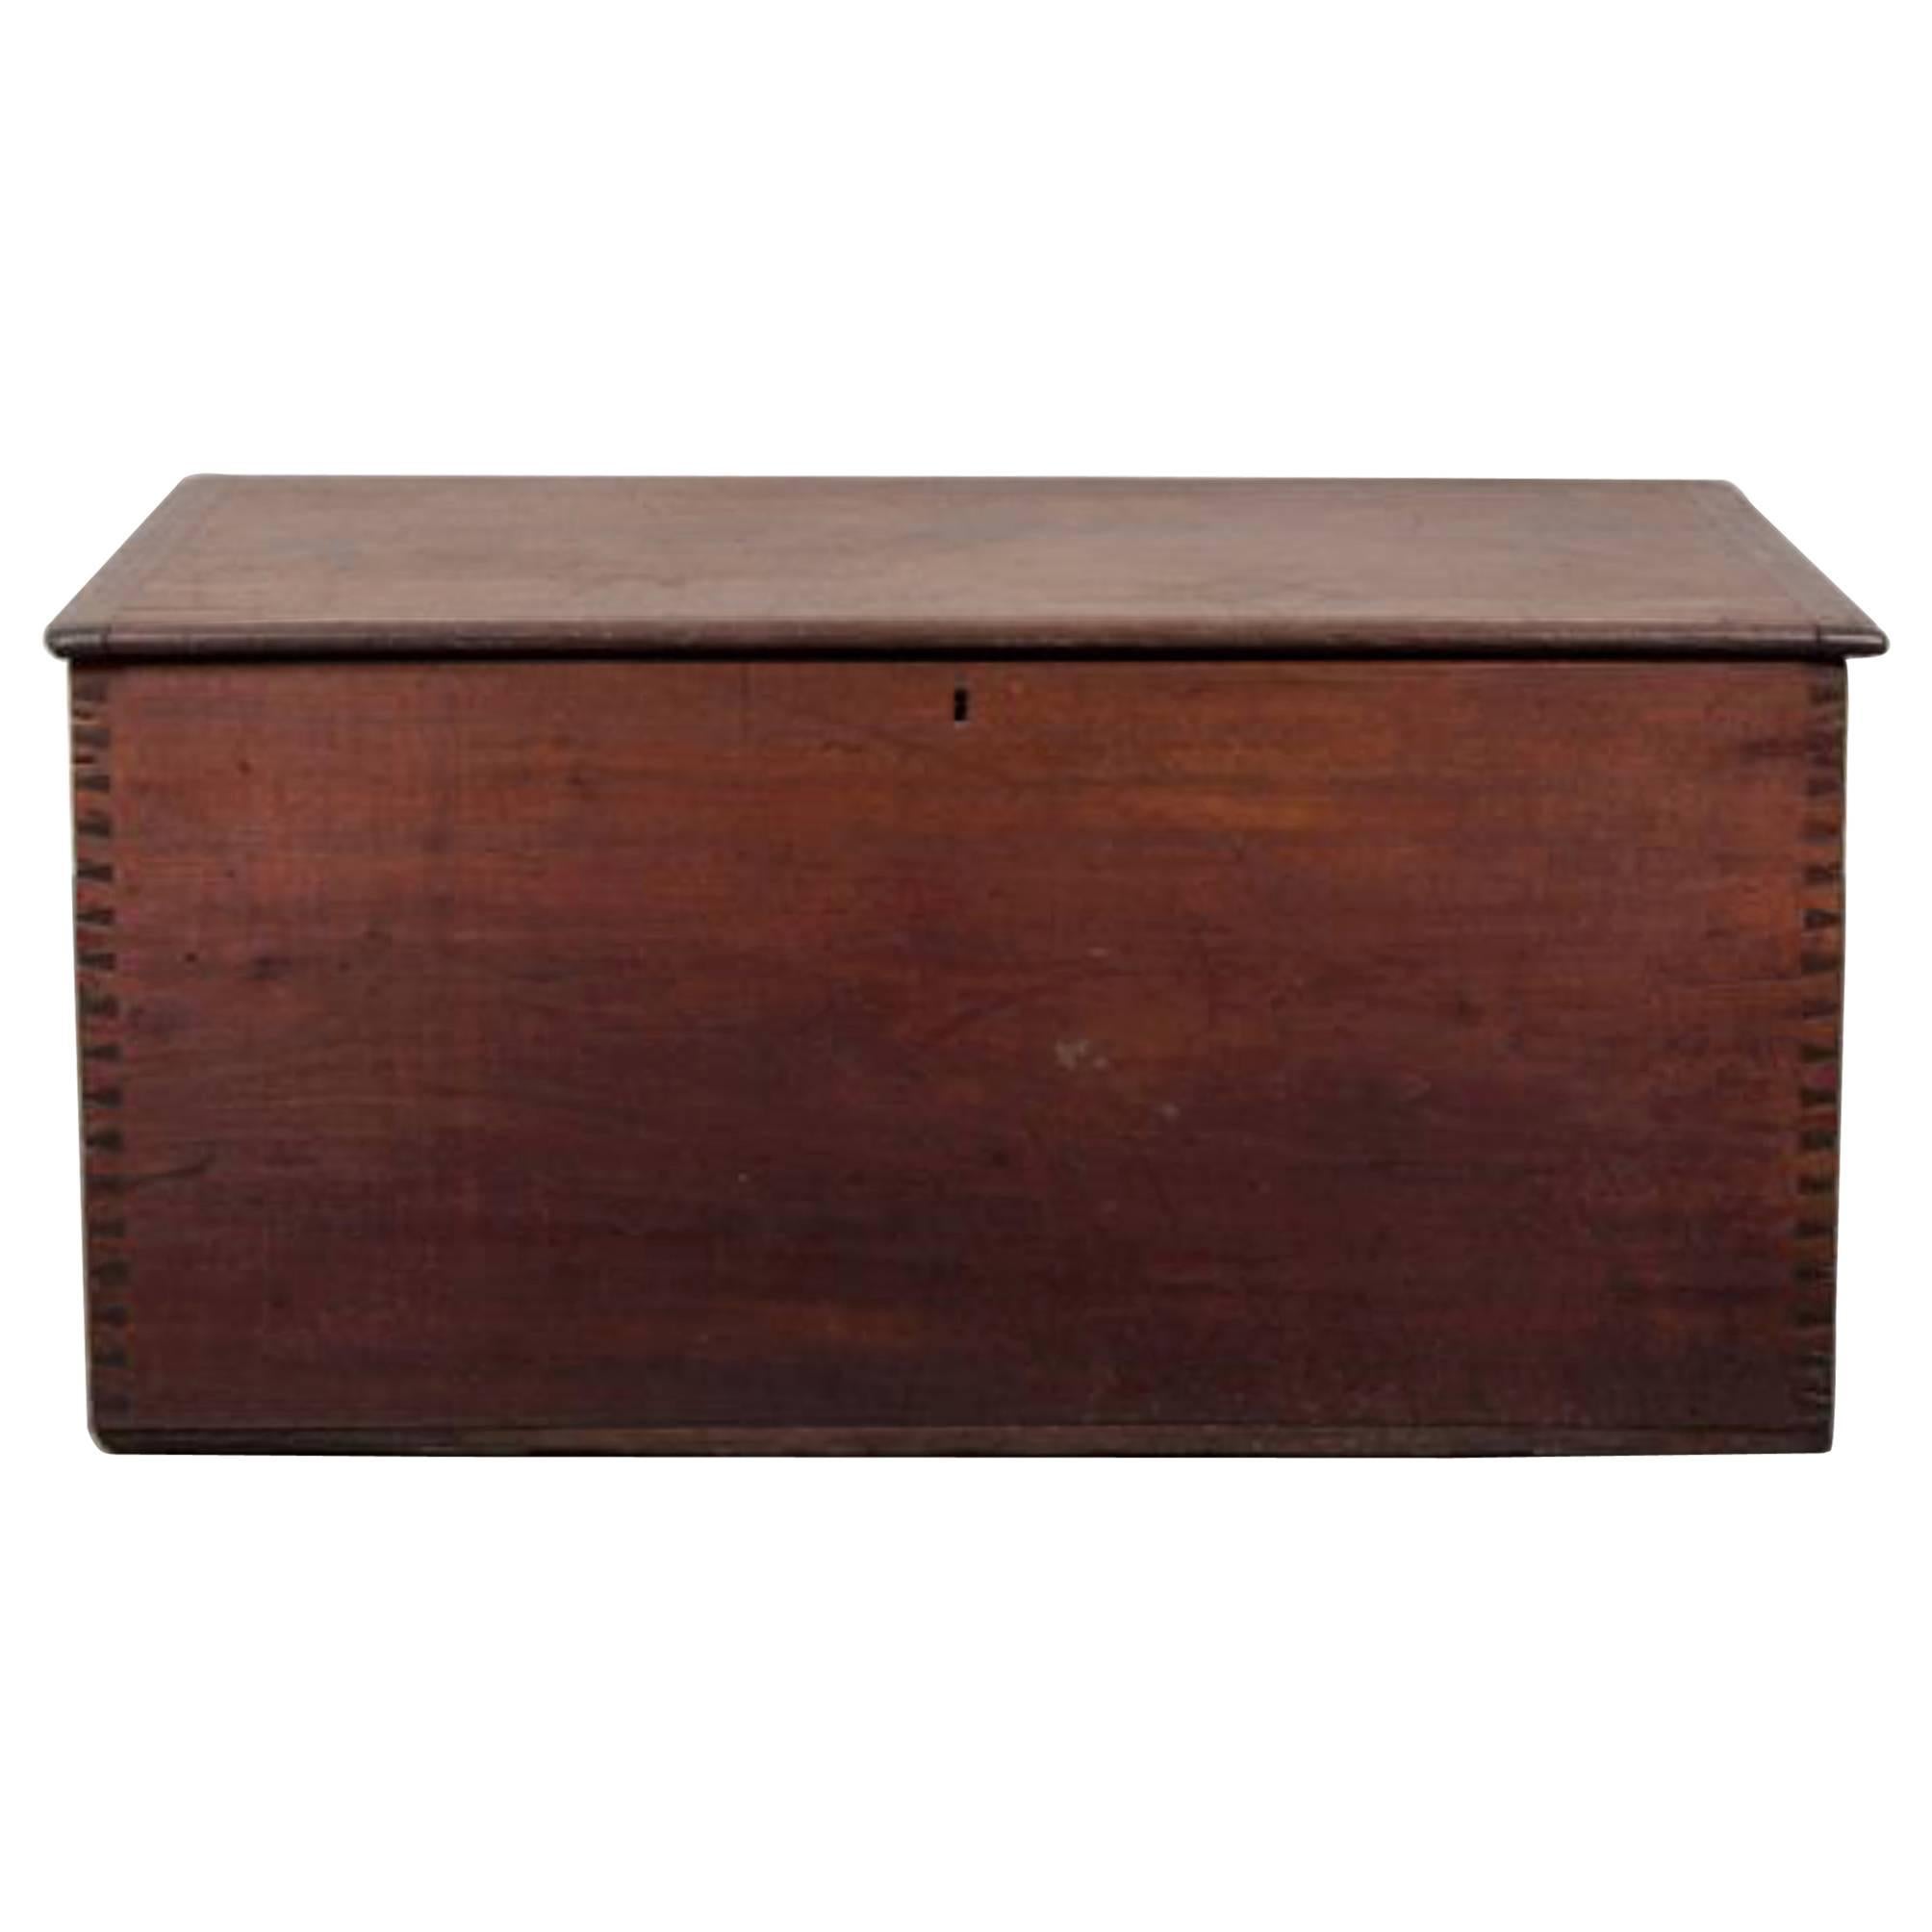 Handsome Mahogany Blanket Chest, Hand Dovetailed Corners and Lovely Color For Sale